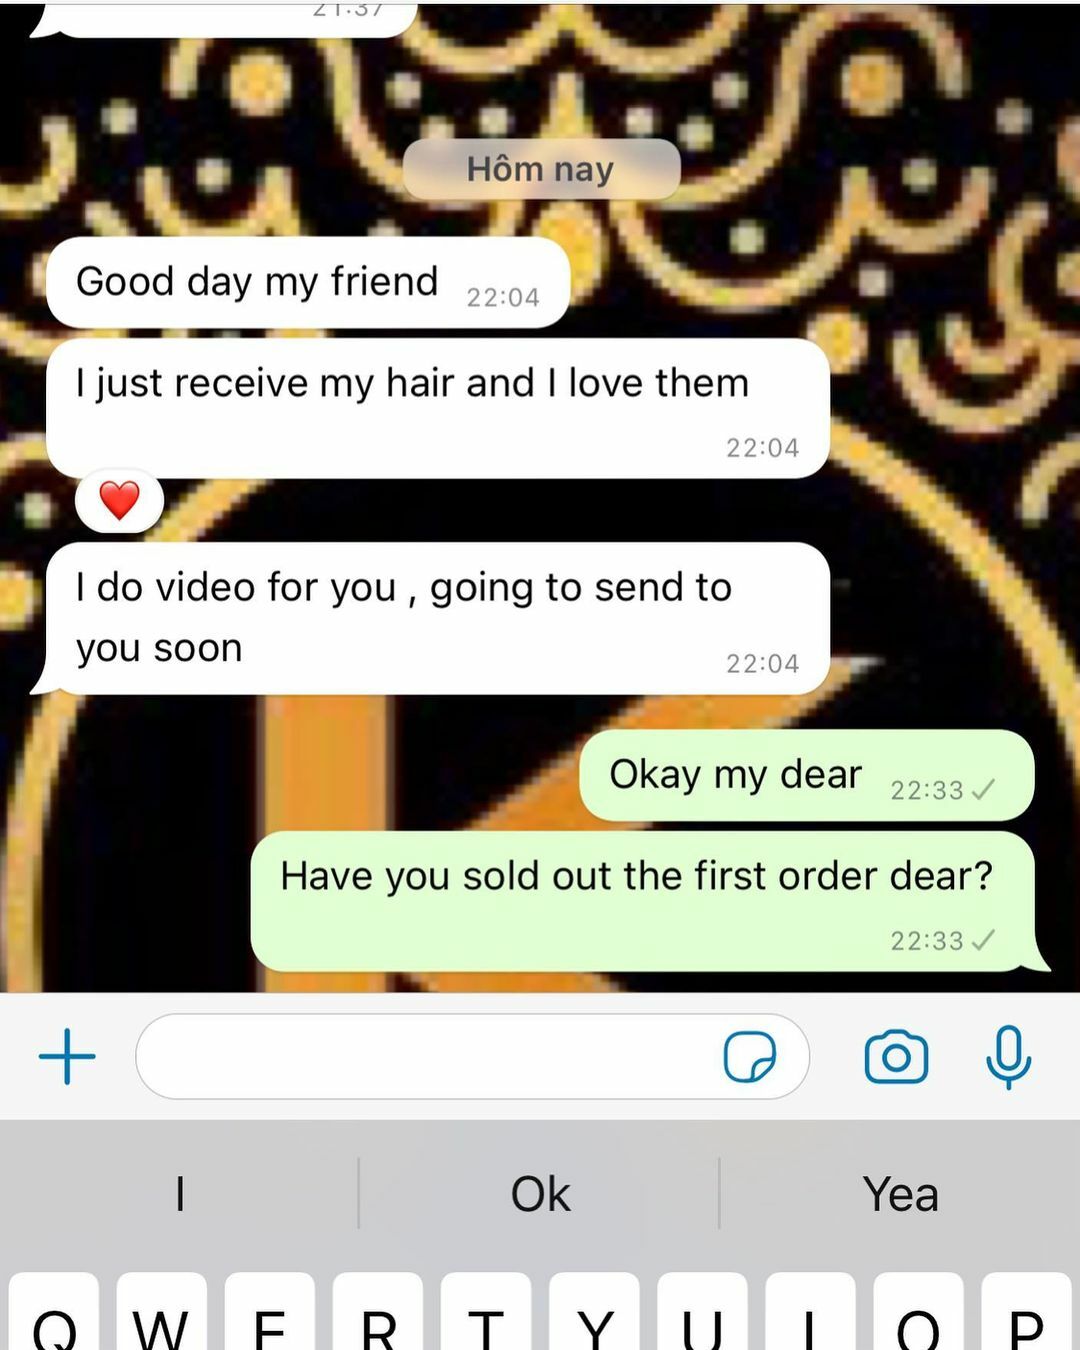 Customer love buying K-Hair's products